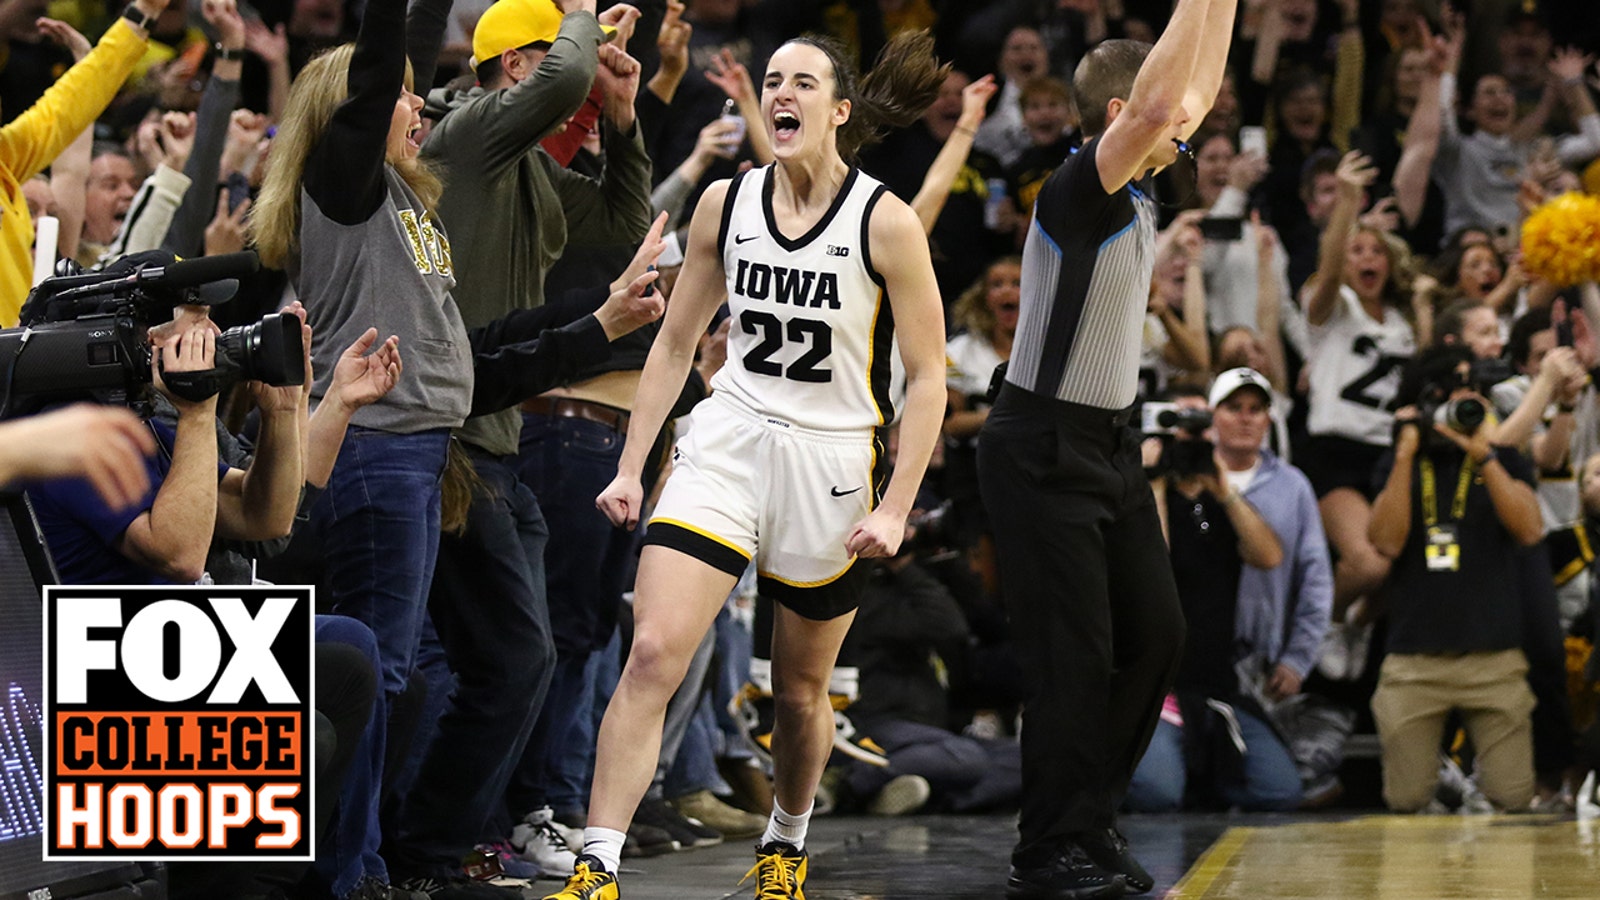 Iowa's Caitlin Clark drops a school-record and career-high 49 points in the win vs. Michigan